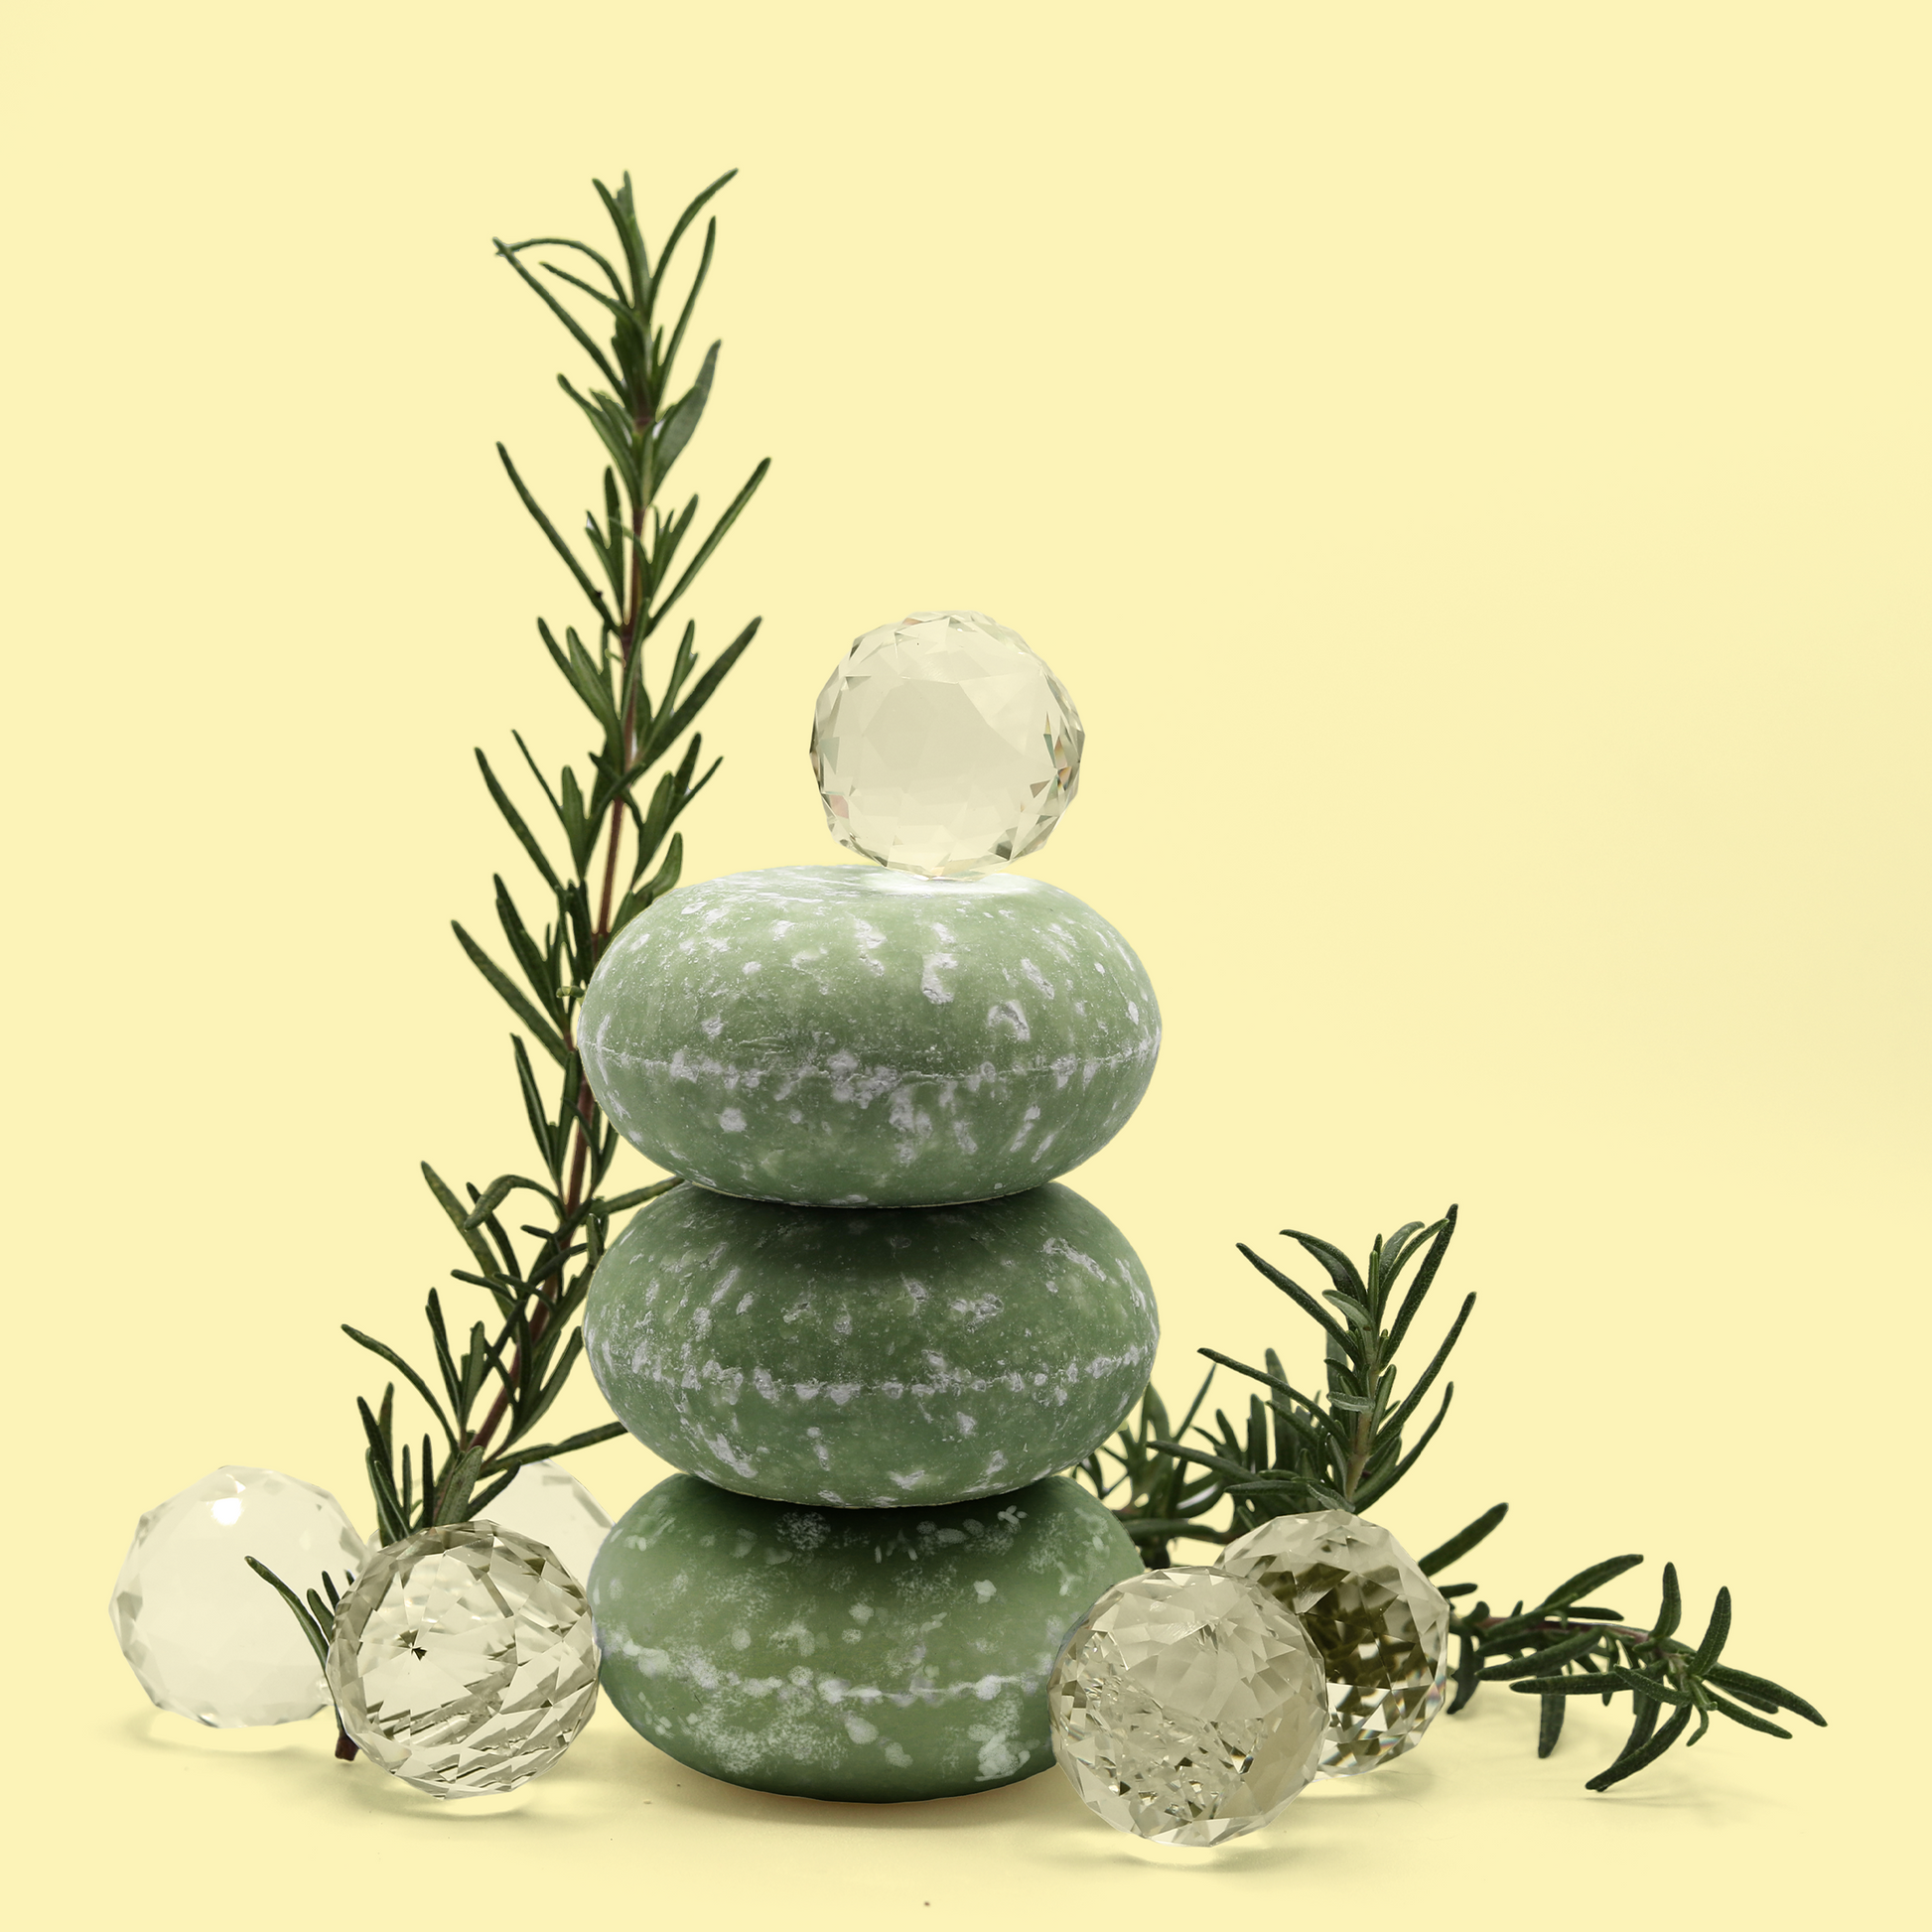 Three bars of the Dew Drop shampoo bars from Sun Basin Soap are stacked on top of each other. The bars are surrounded by shiny crystal balls and sprigs of rosemary. A Good Store subscription product.